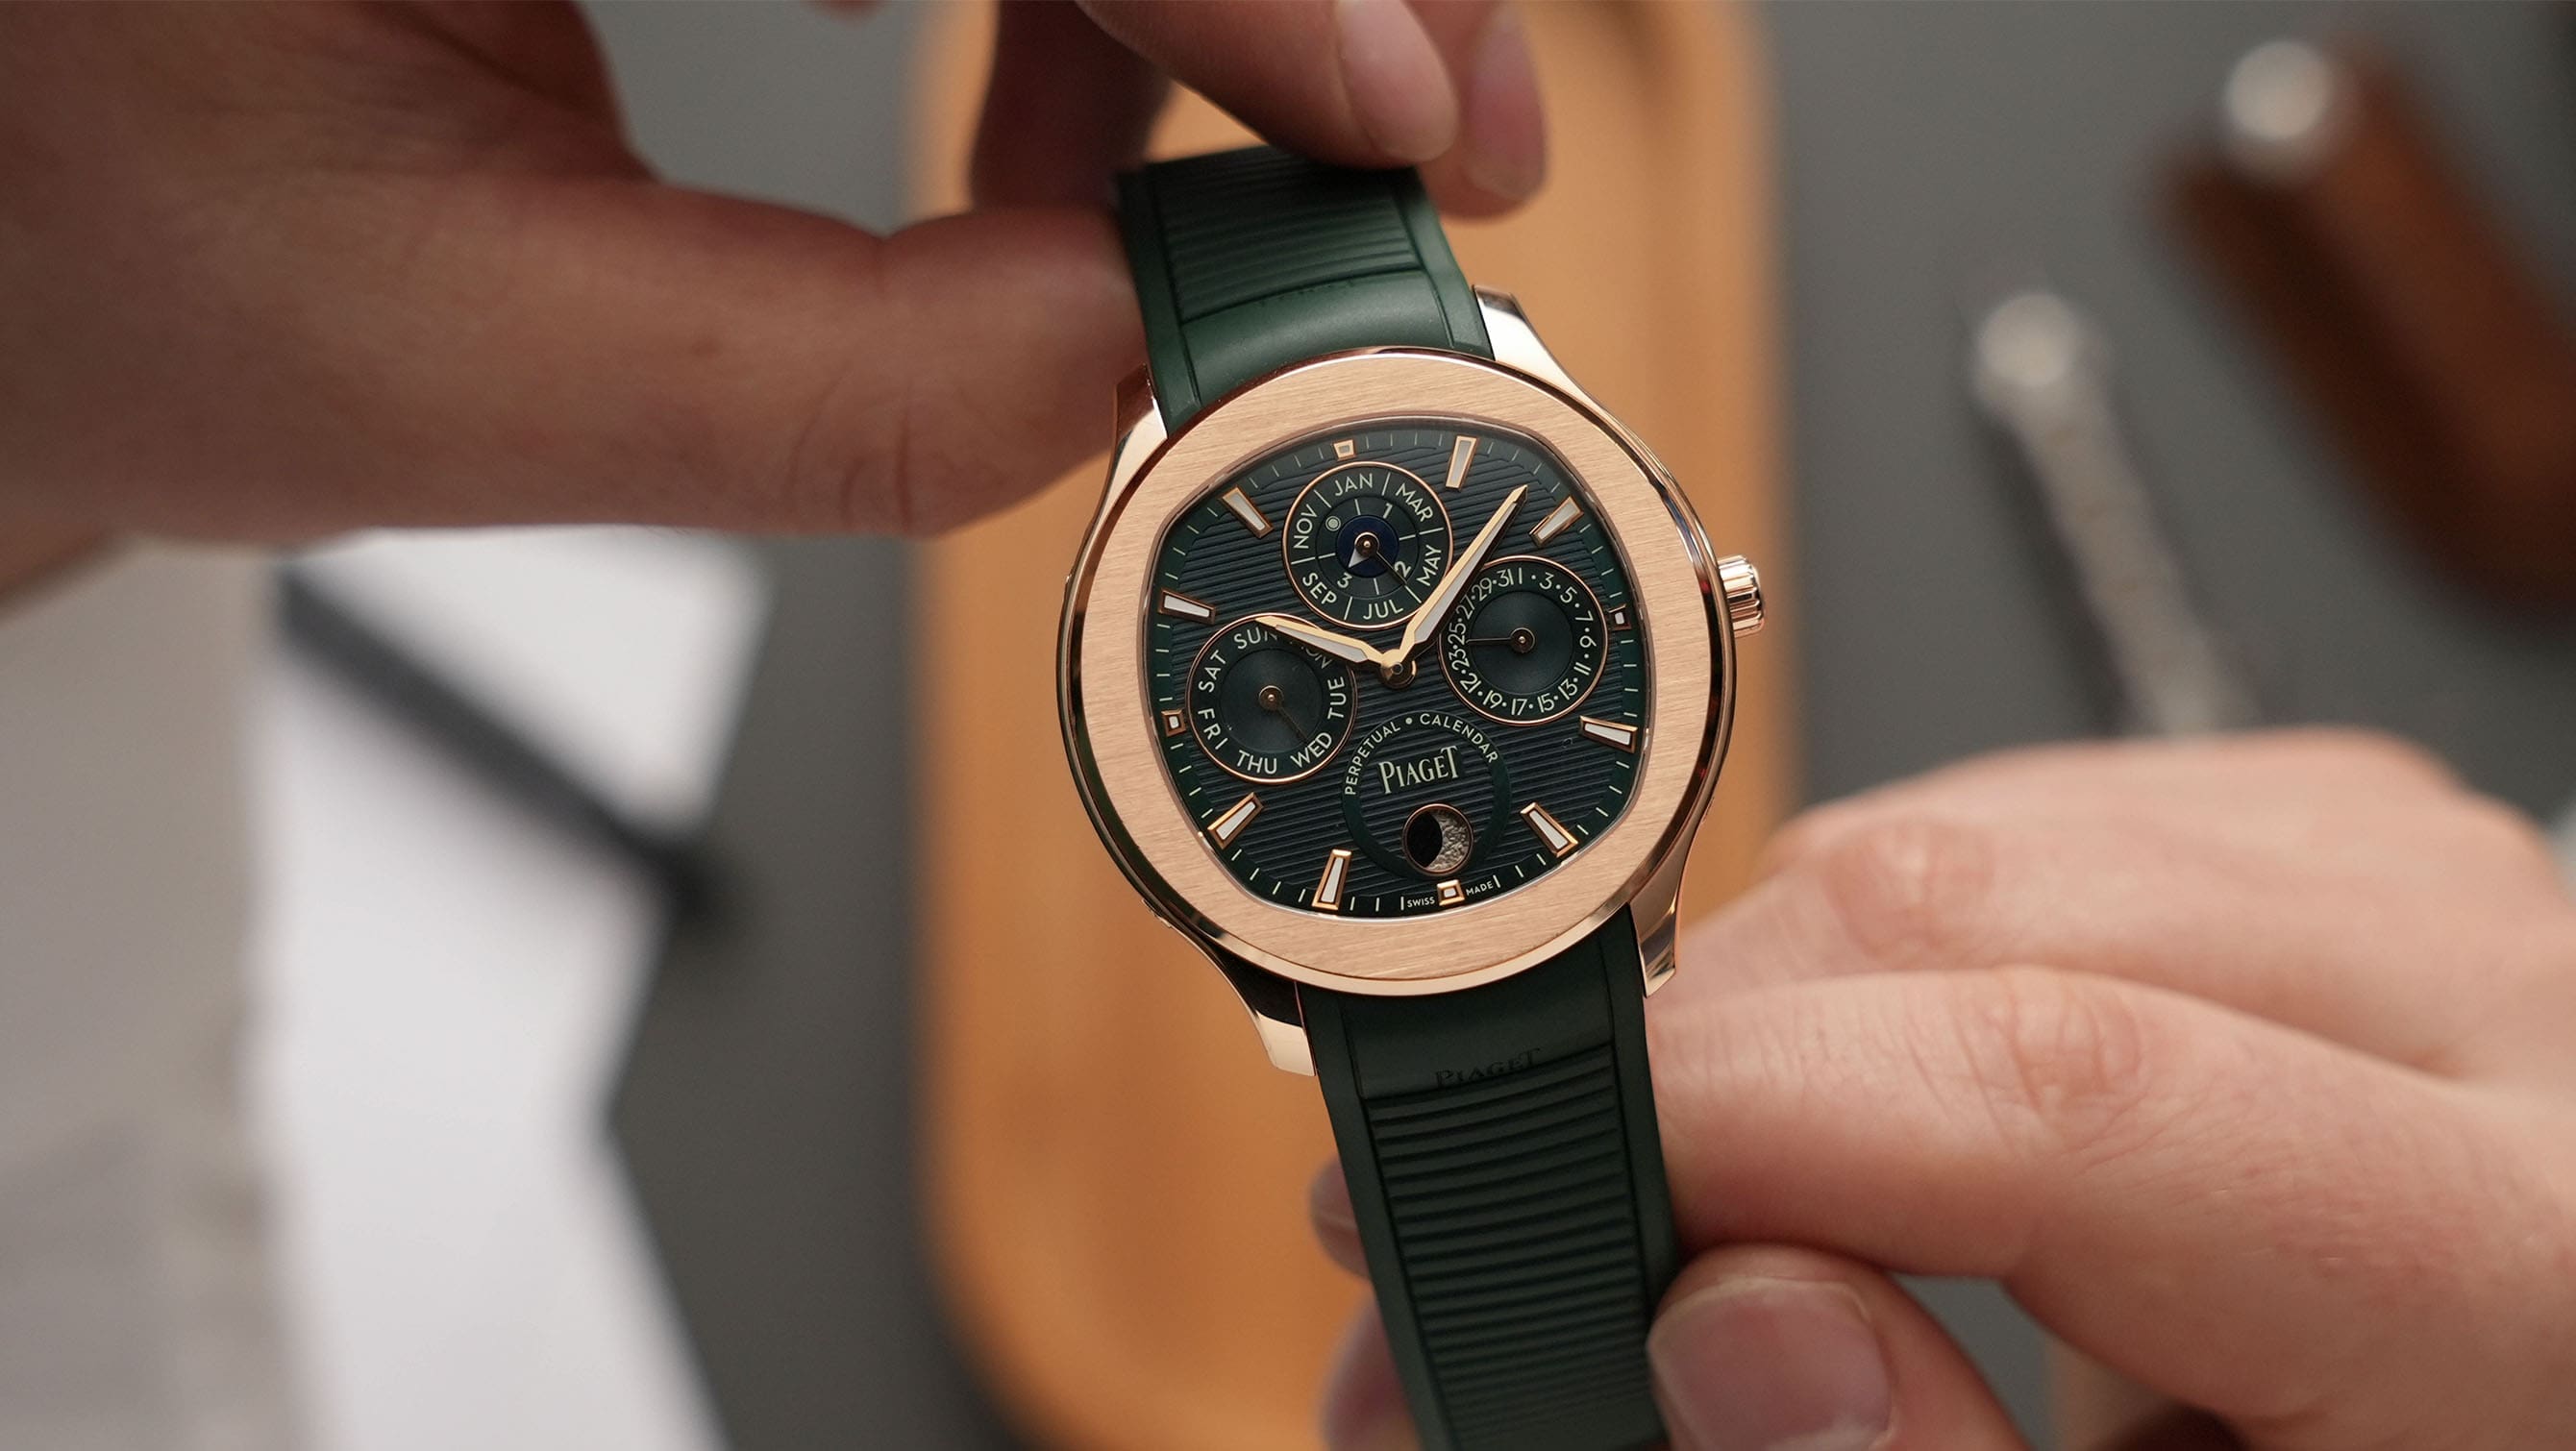 The Piaget Polo Perpetual Calendar Ultra-Thin commits to green and gold